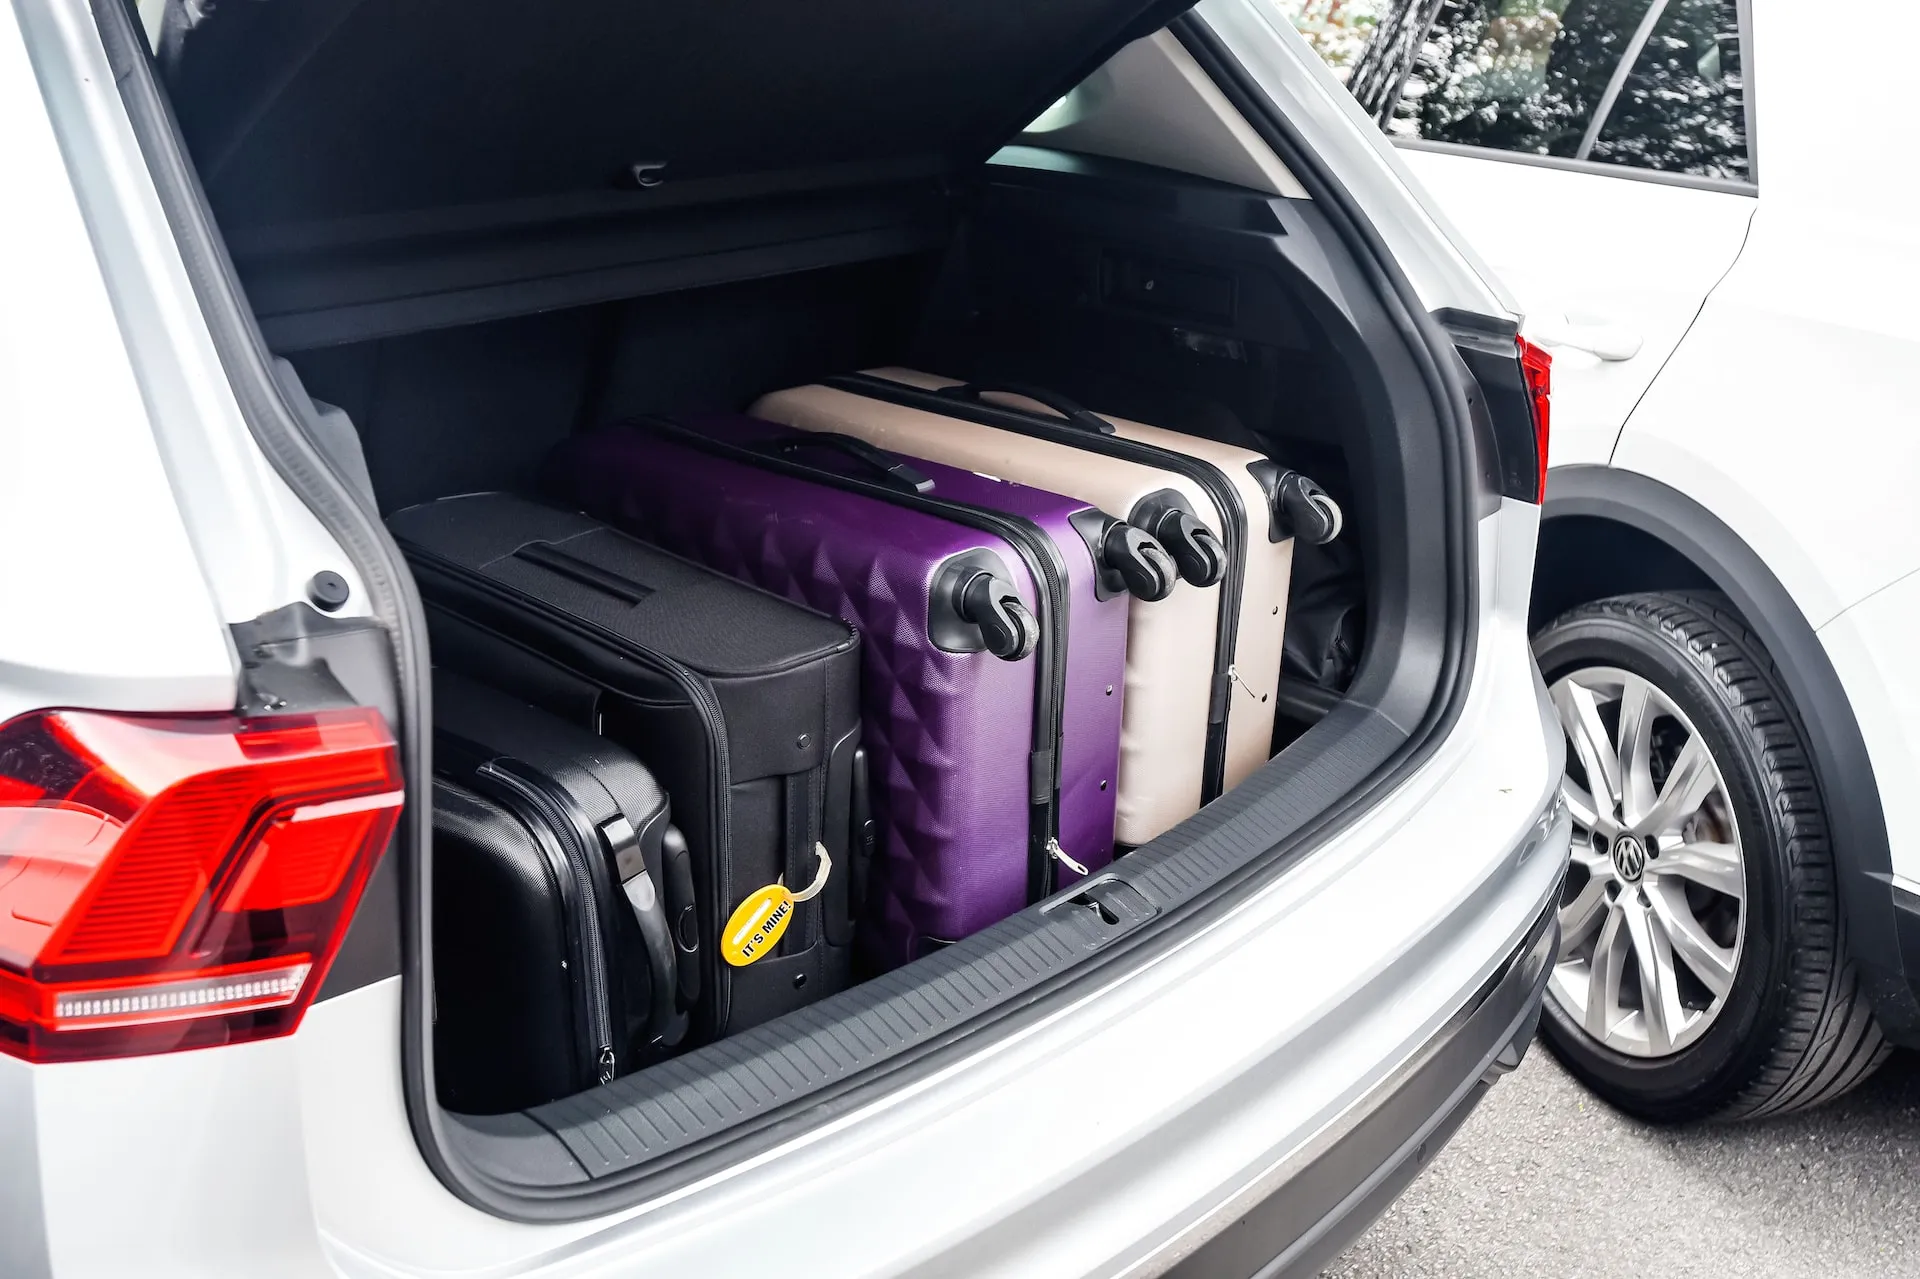 Essential road trip bags - luggage for car trunk